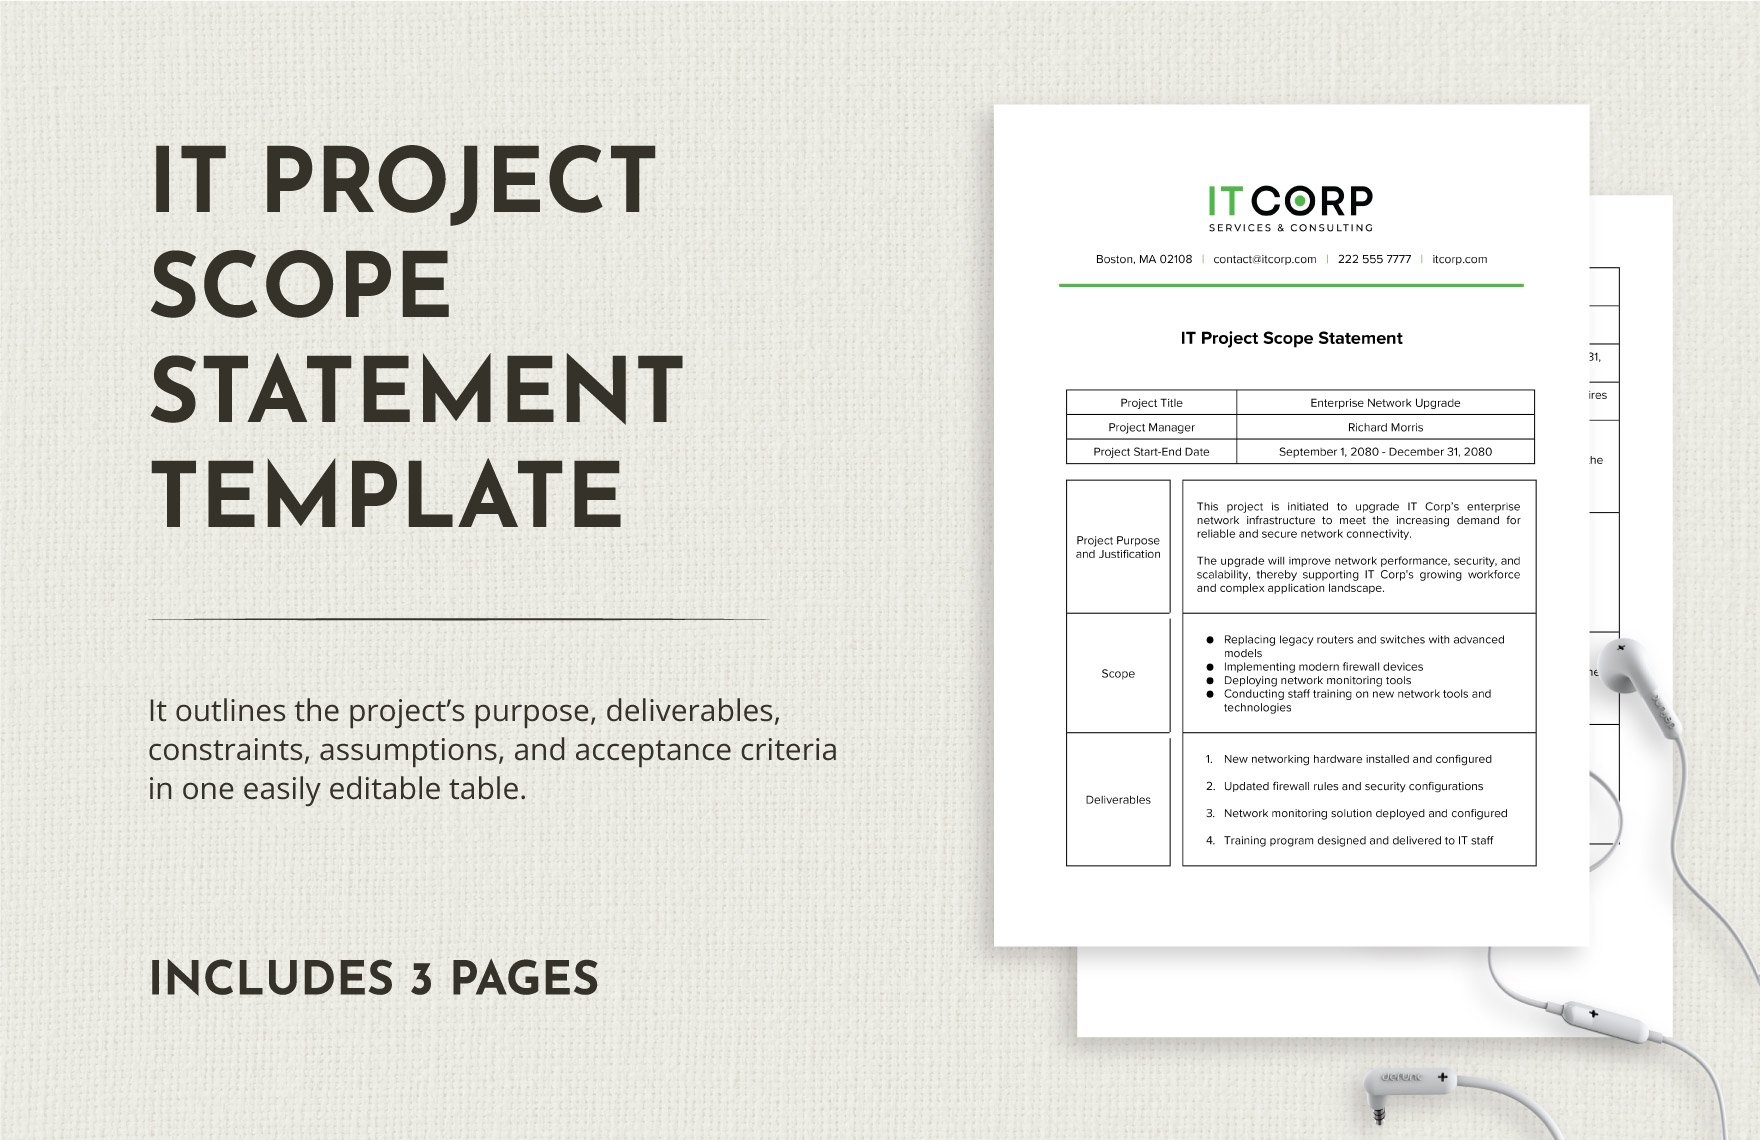 IT Project Scope Statement Template